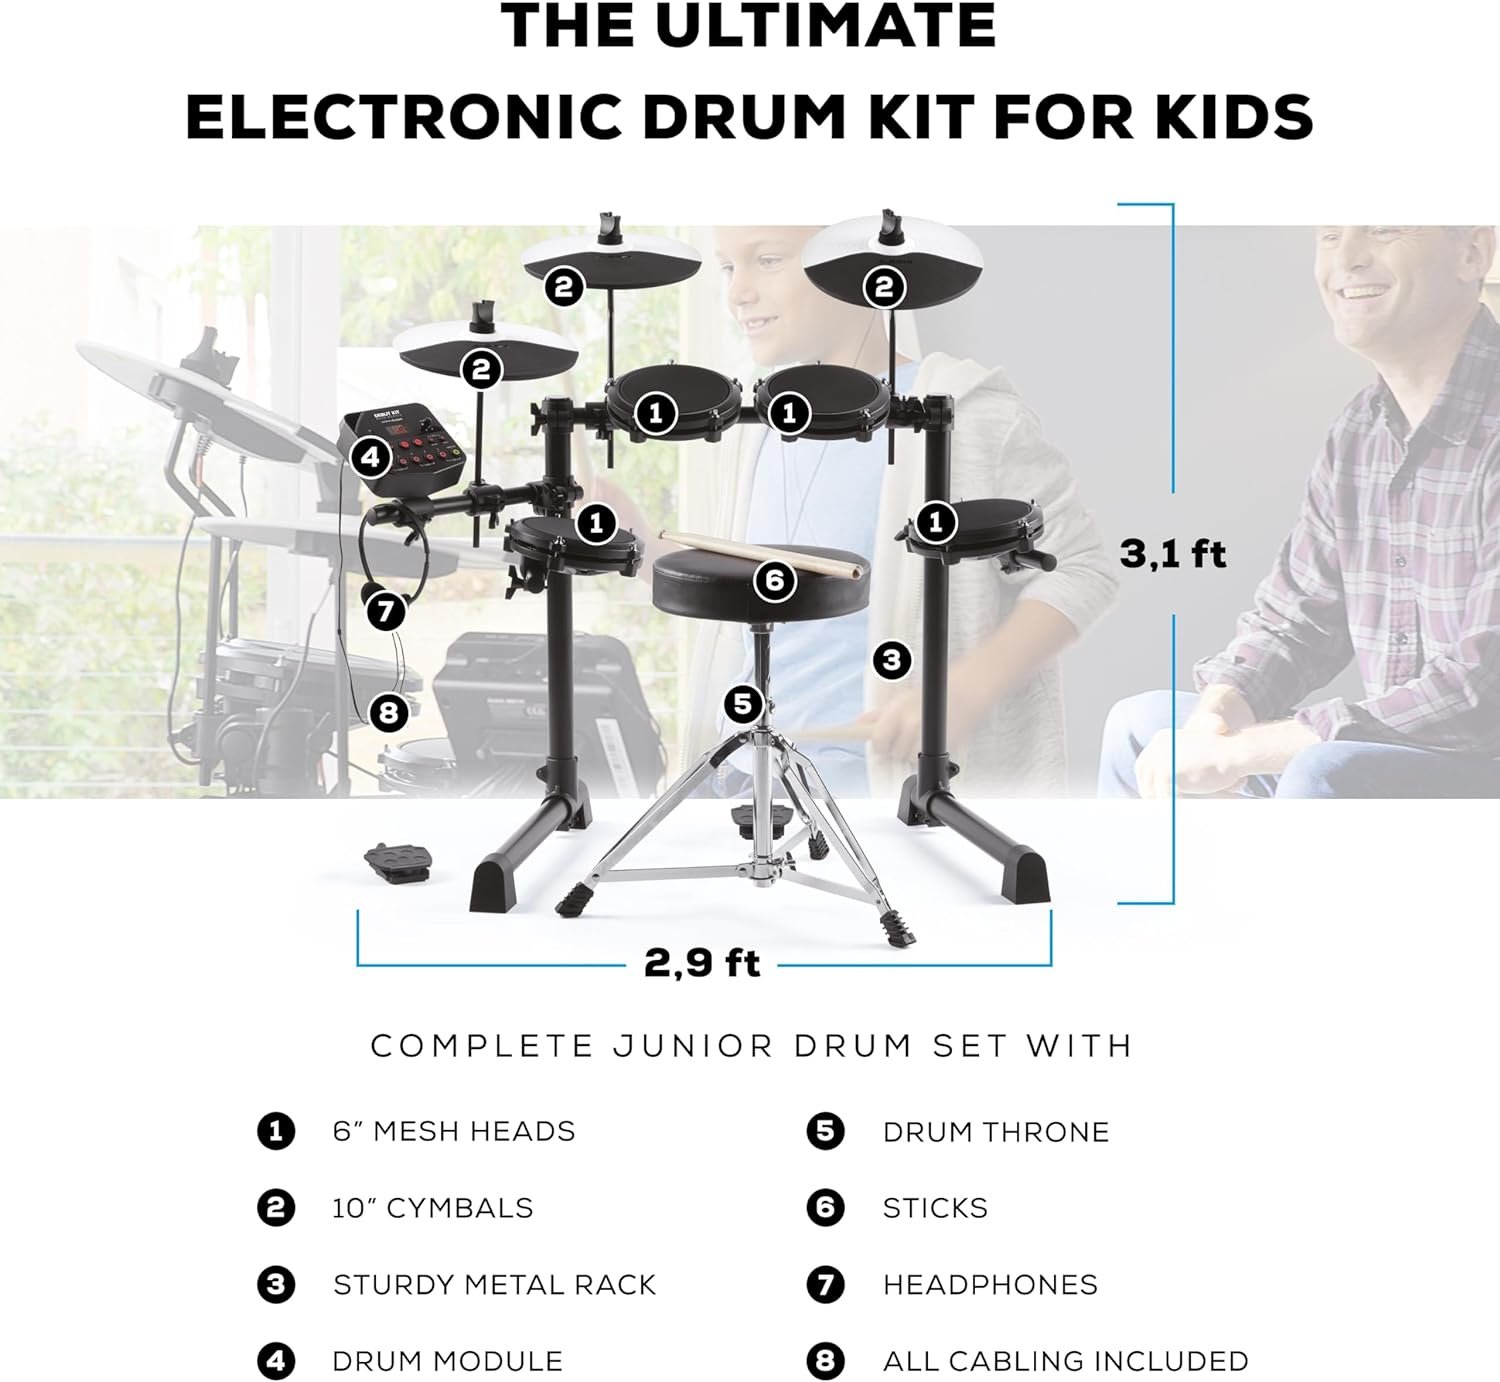 The Alesis Drums Debut Kit: A Perfect Drum Set for Kids